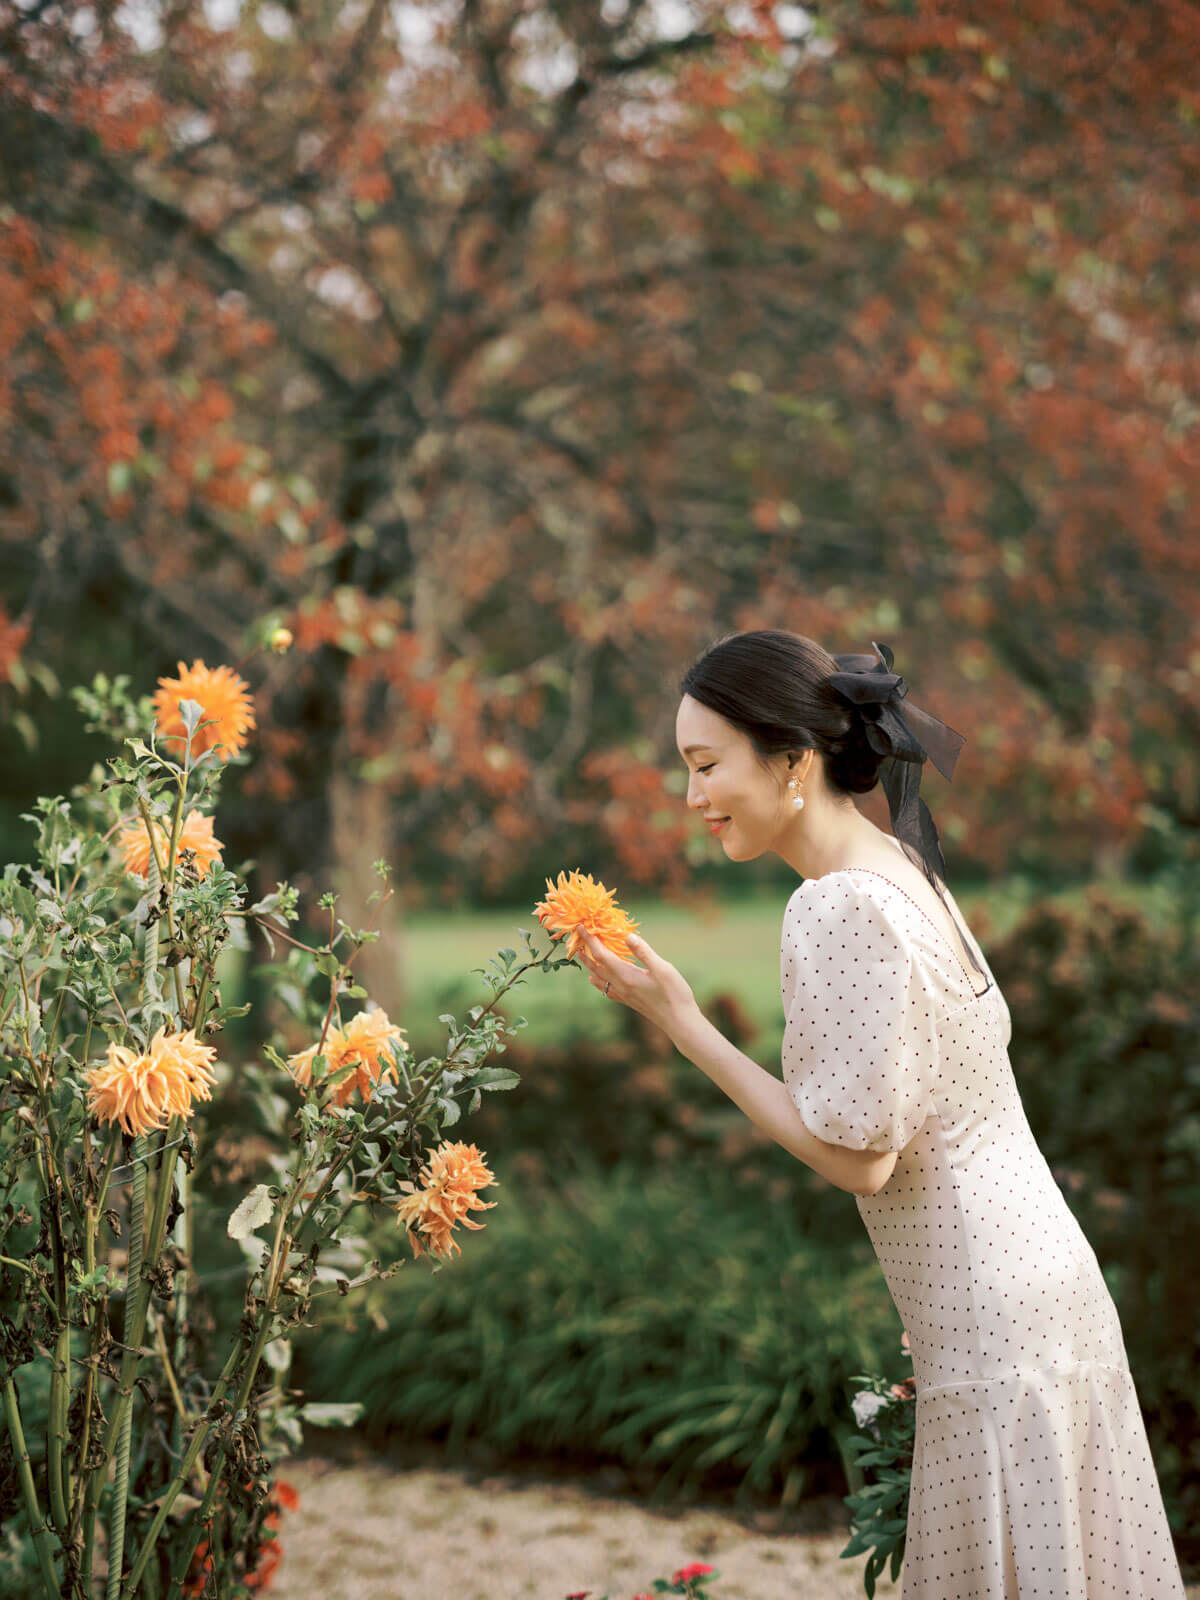 The engaged woman is happily touching a beautiful orange flower amidst the beautiful fall foliage. Image by Jenny Fu Studio